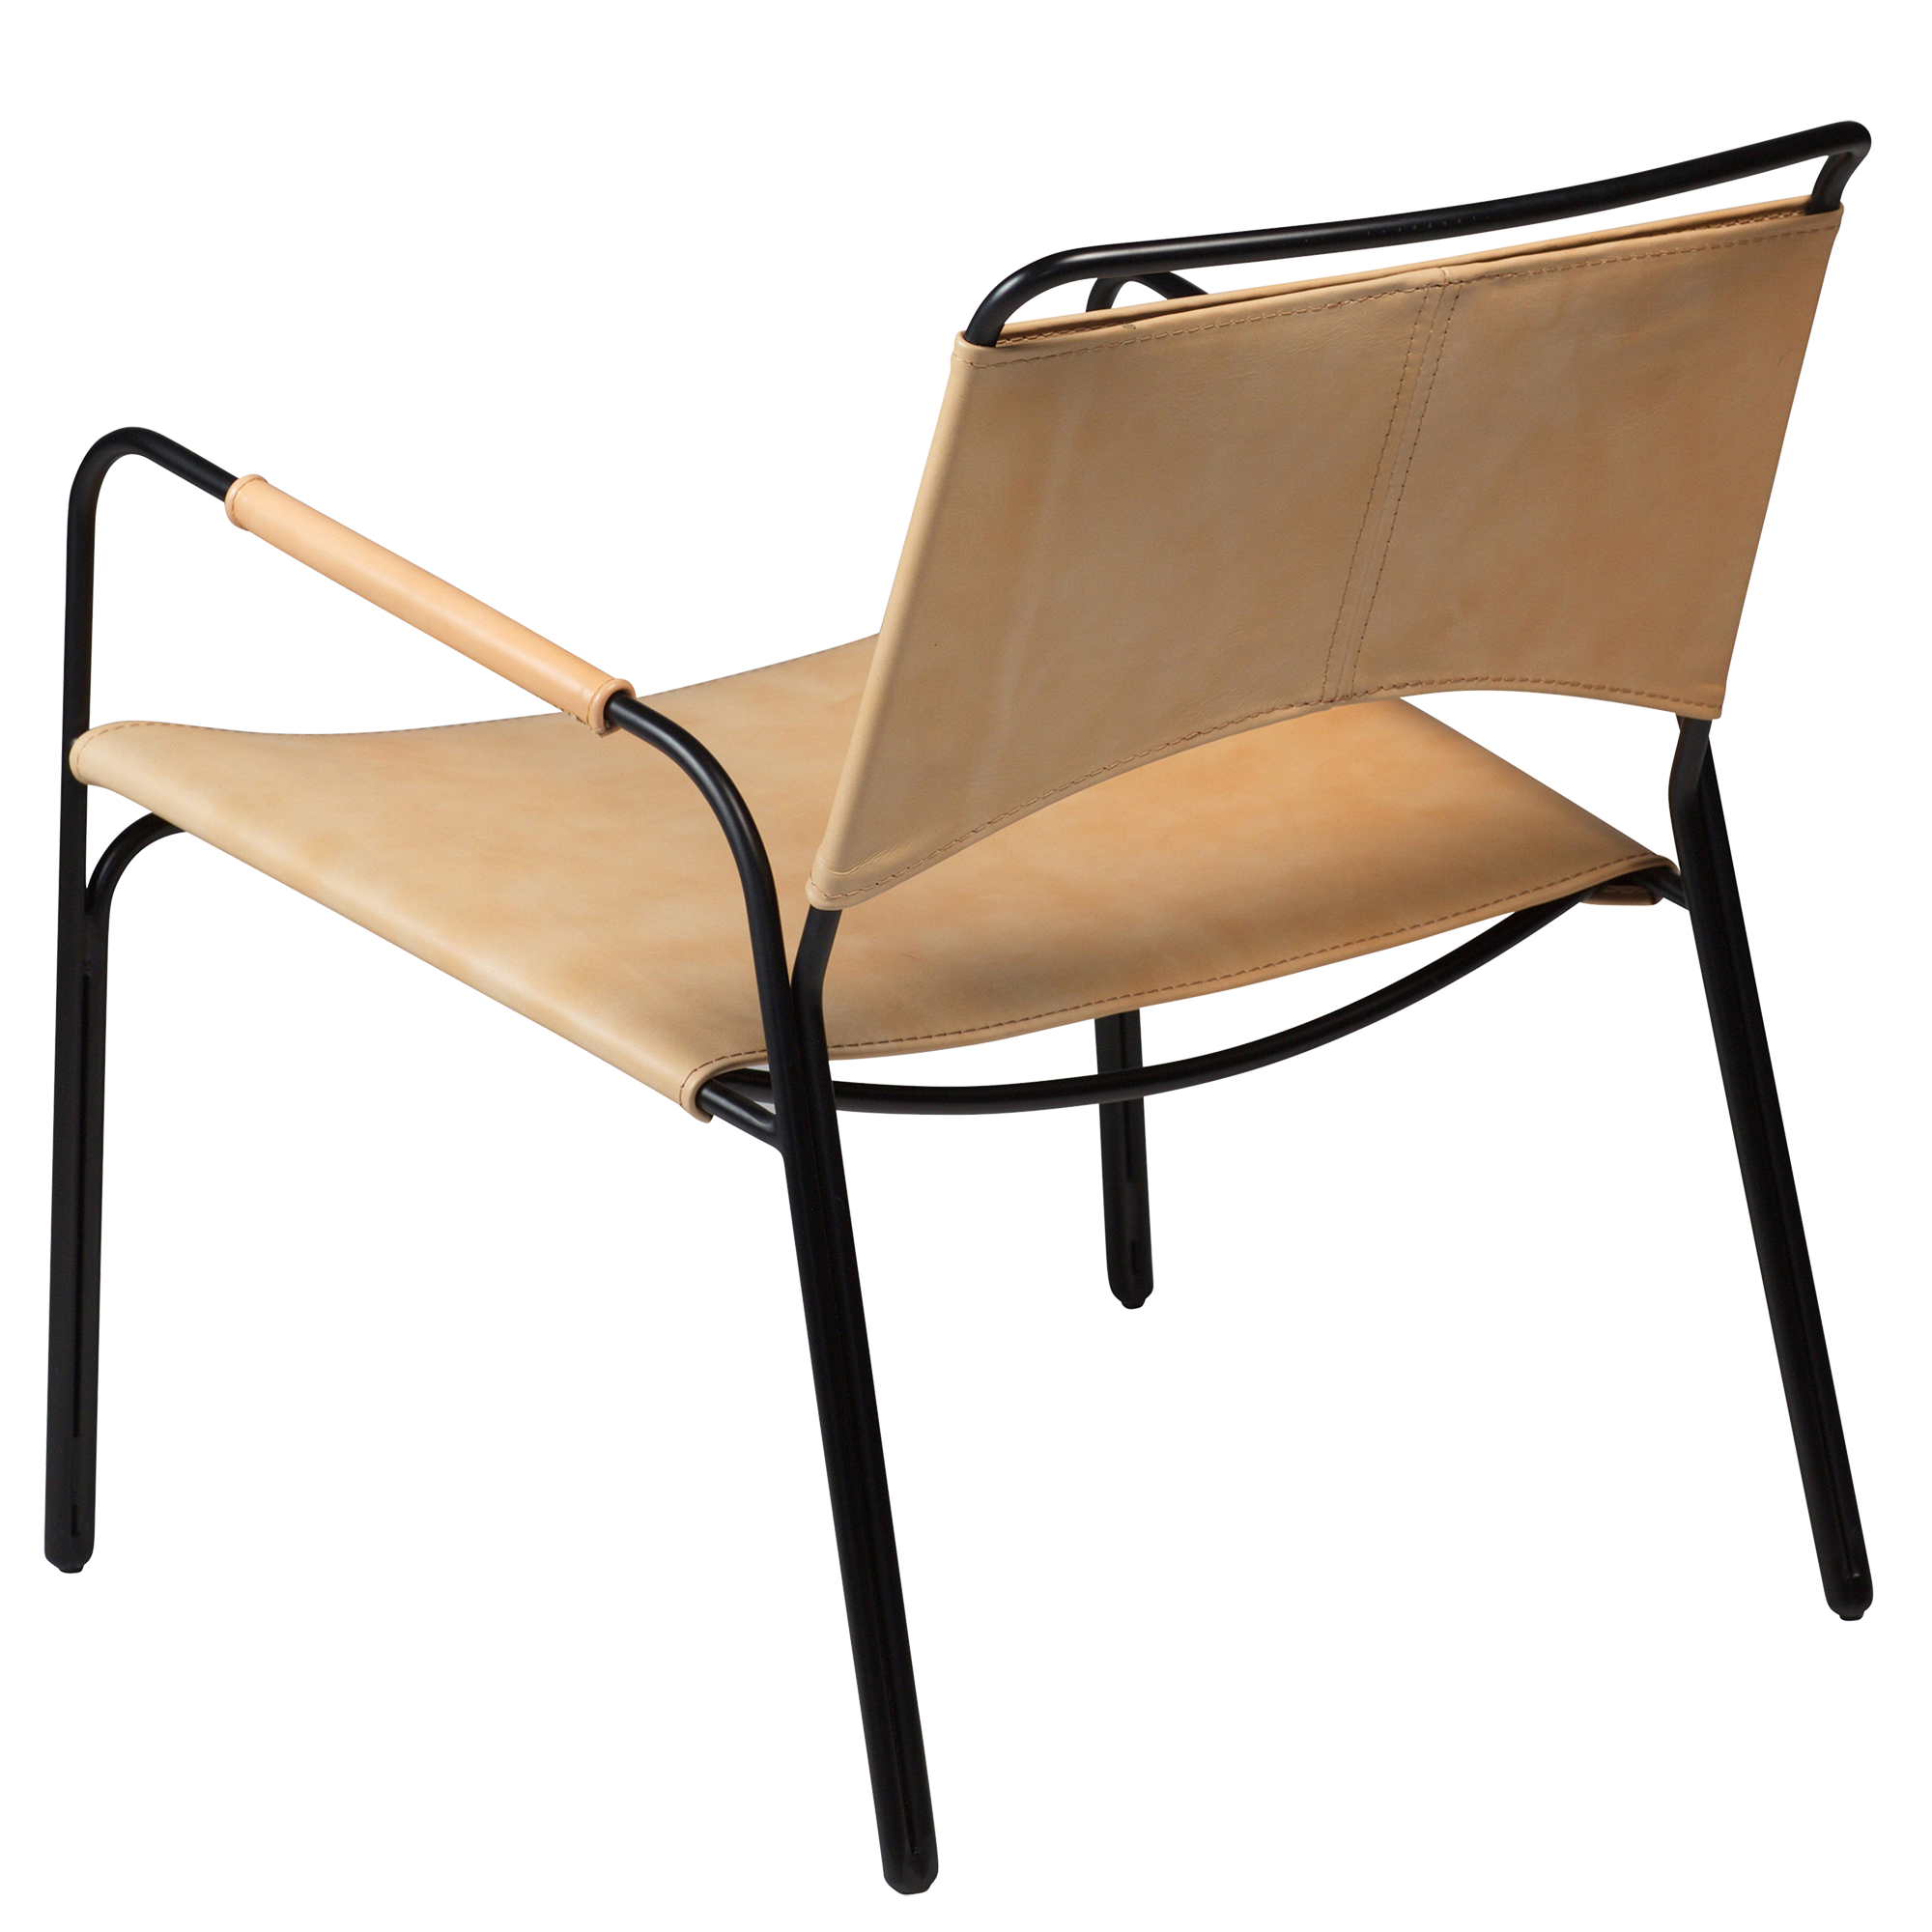 Paz Lounge Chair Tan Leather With Black Metal Legs 700801901 02 Back